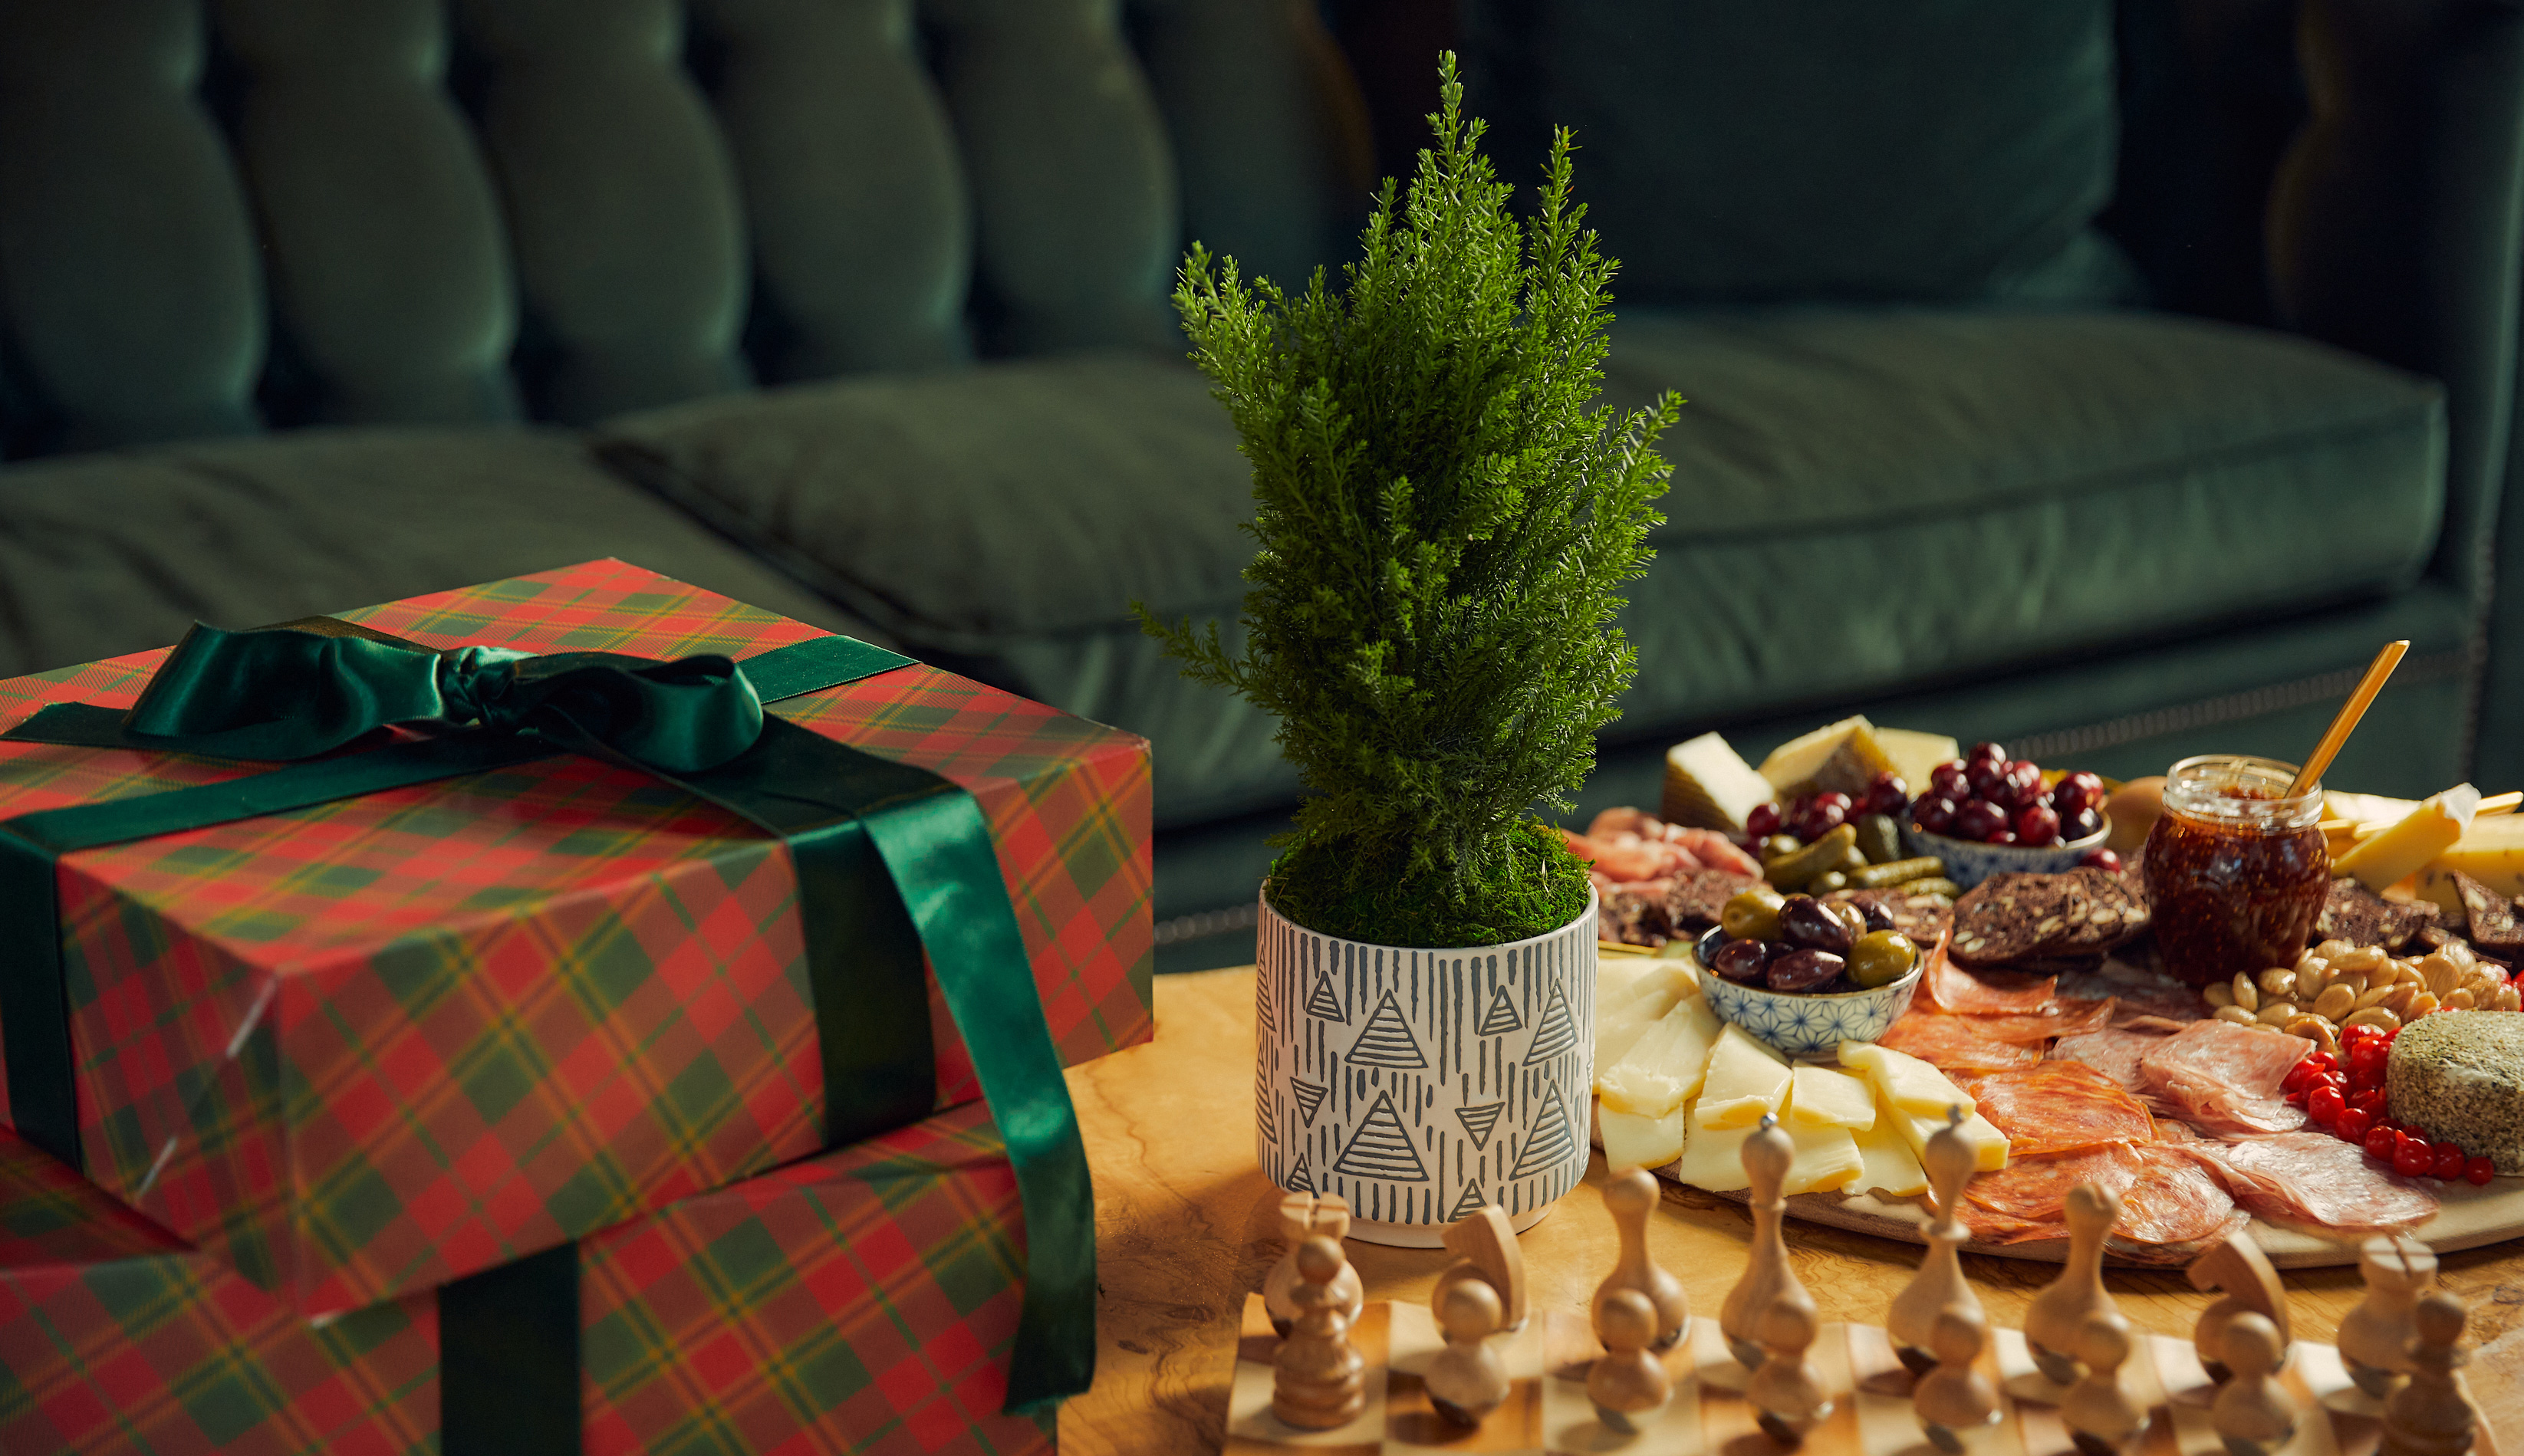 Holiday gifts on a table next to holiday Christmas tree perfect for a holiday centerpiece